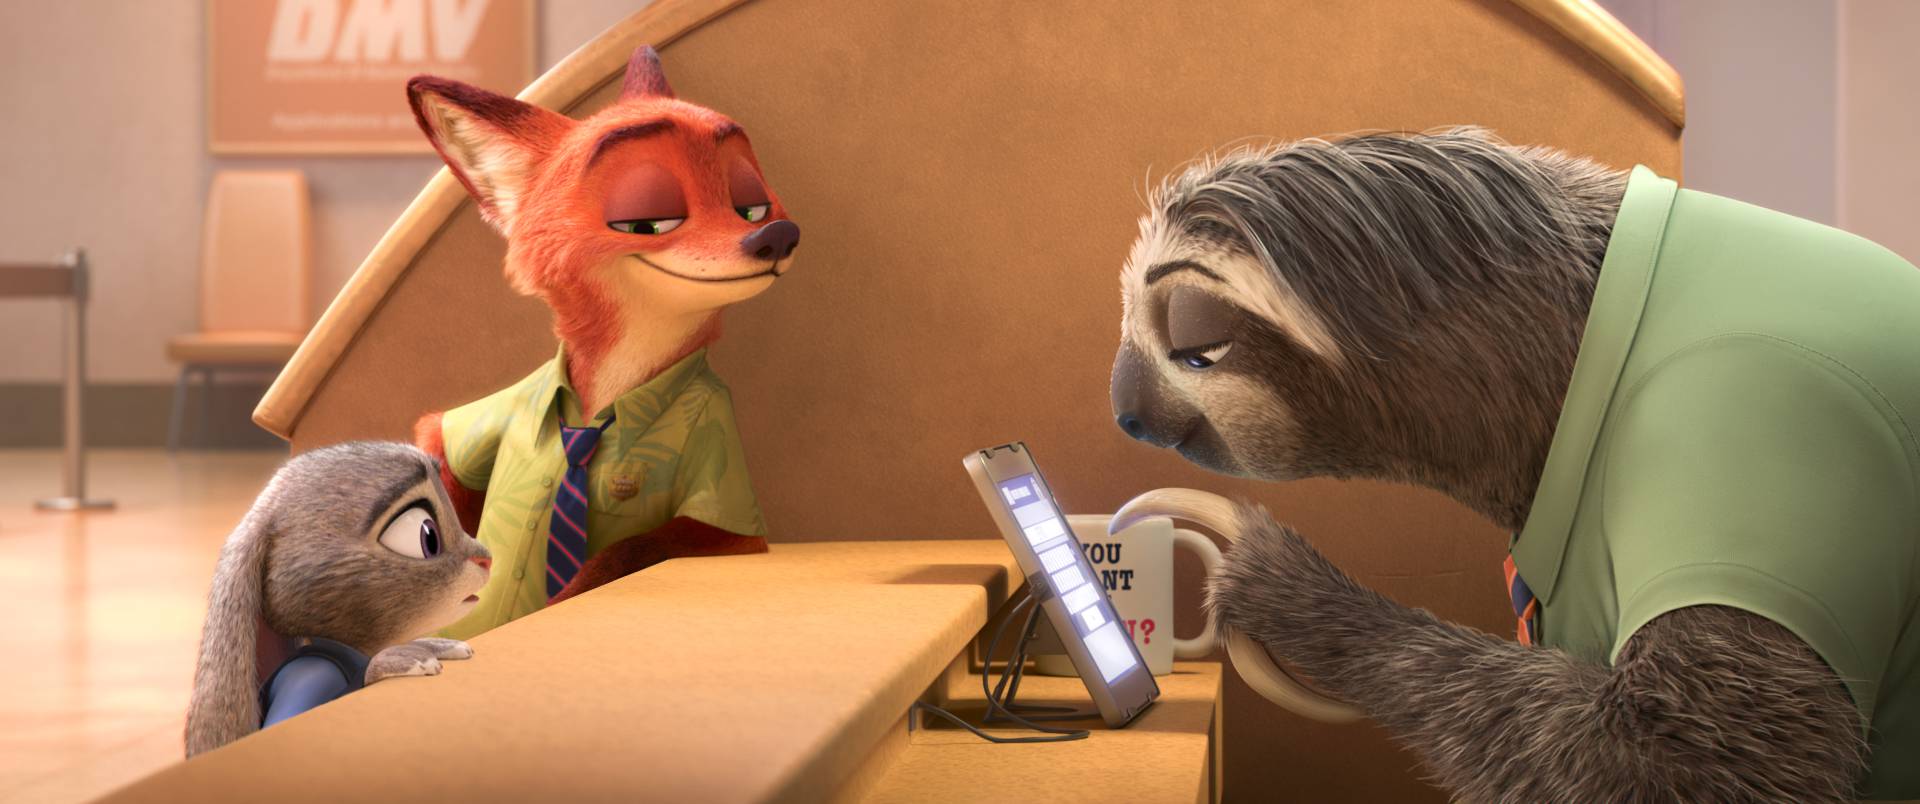 Zootopia download the new